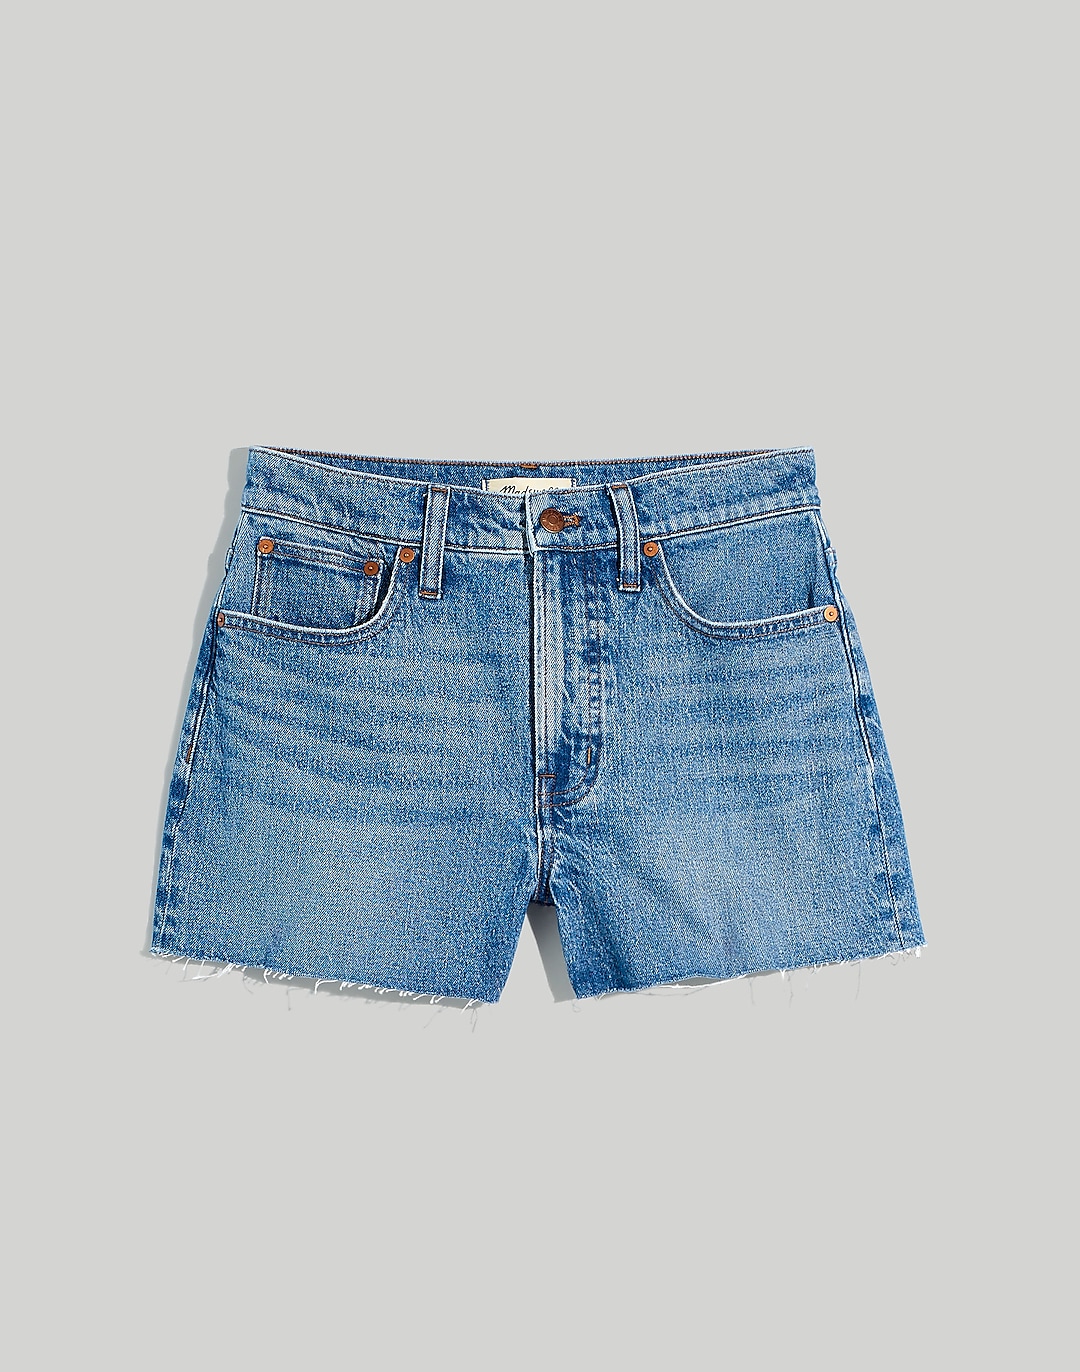 The Perfect Vintage Jean Short in Swanset Wash | Madewell